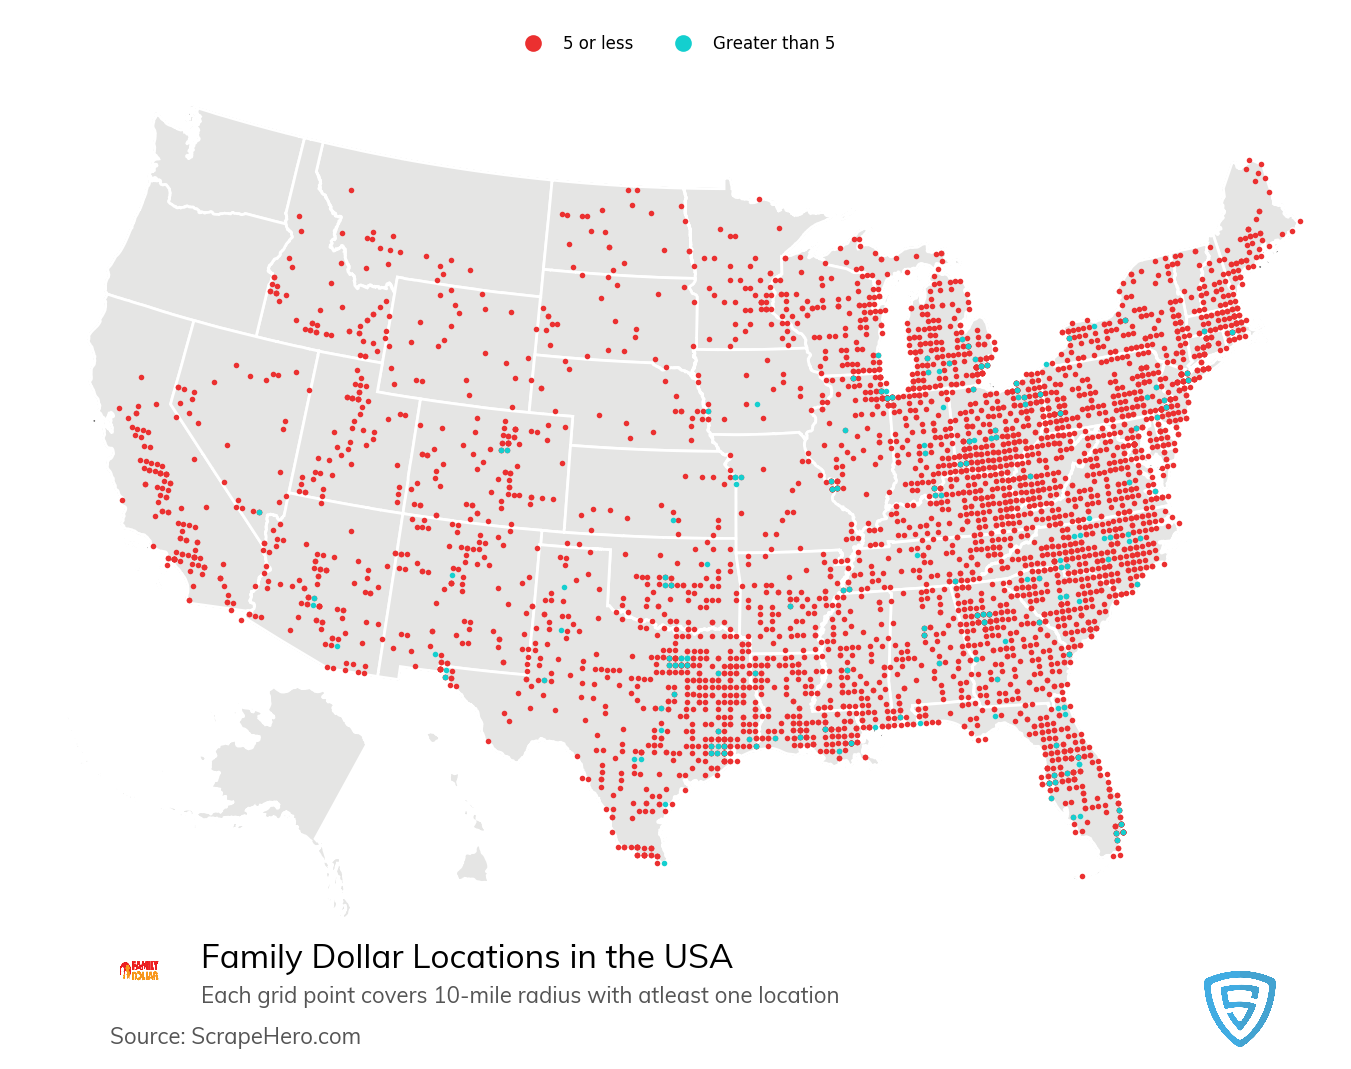 Dollar Stores and where to find them in US Location Analysis